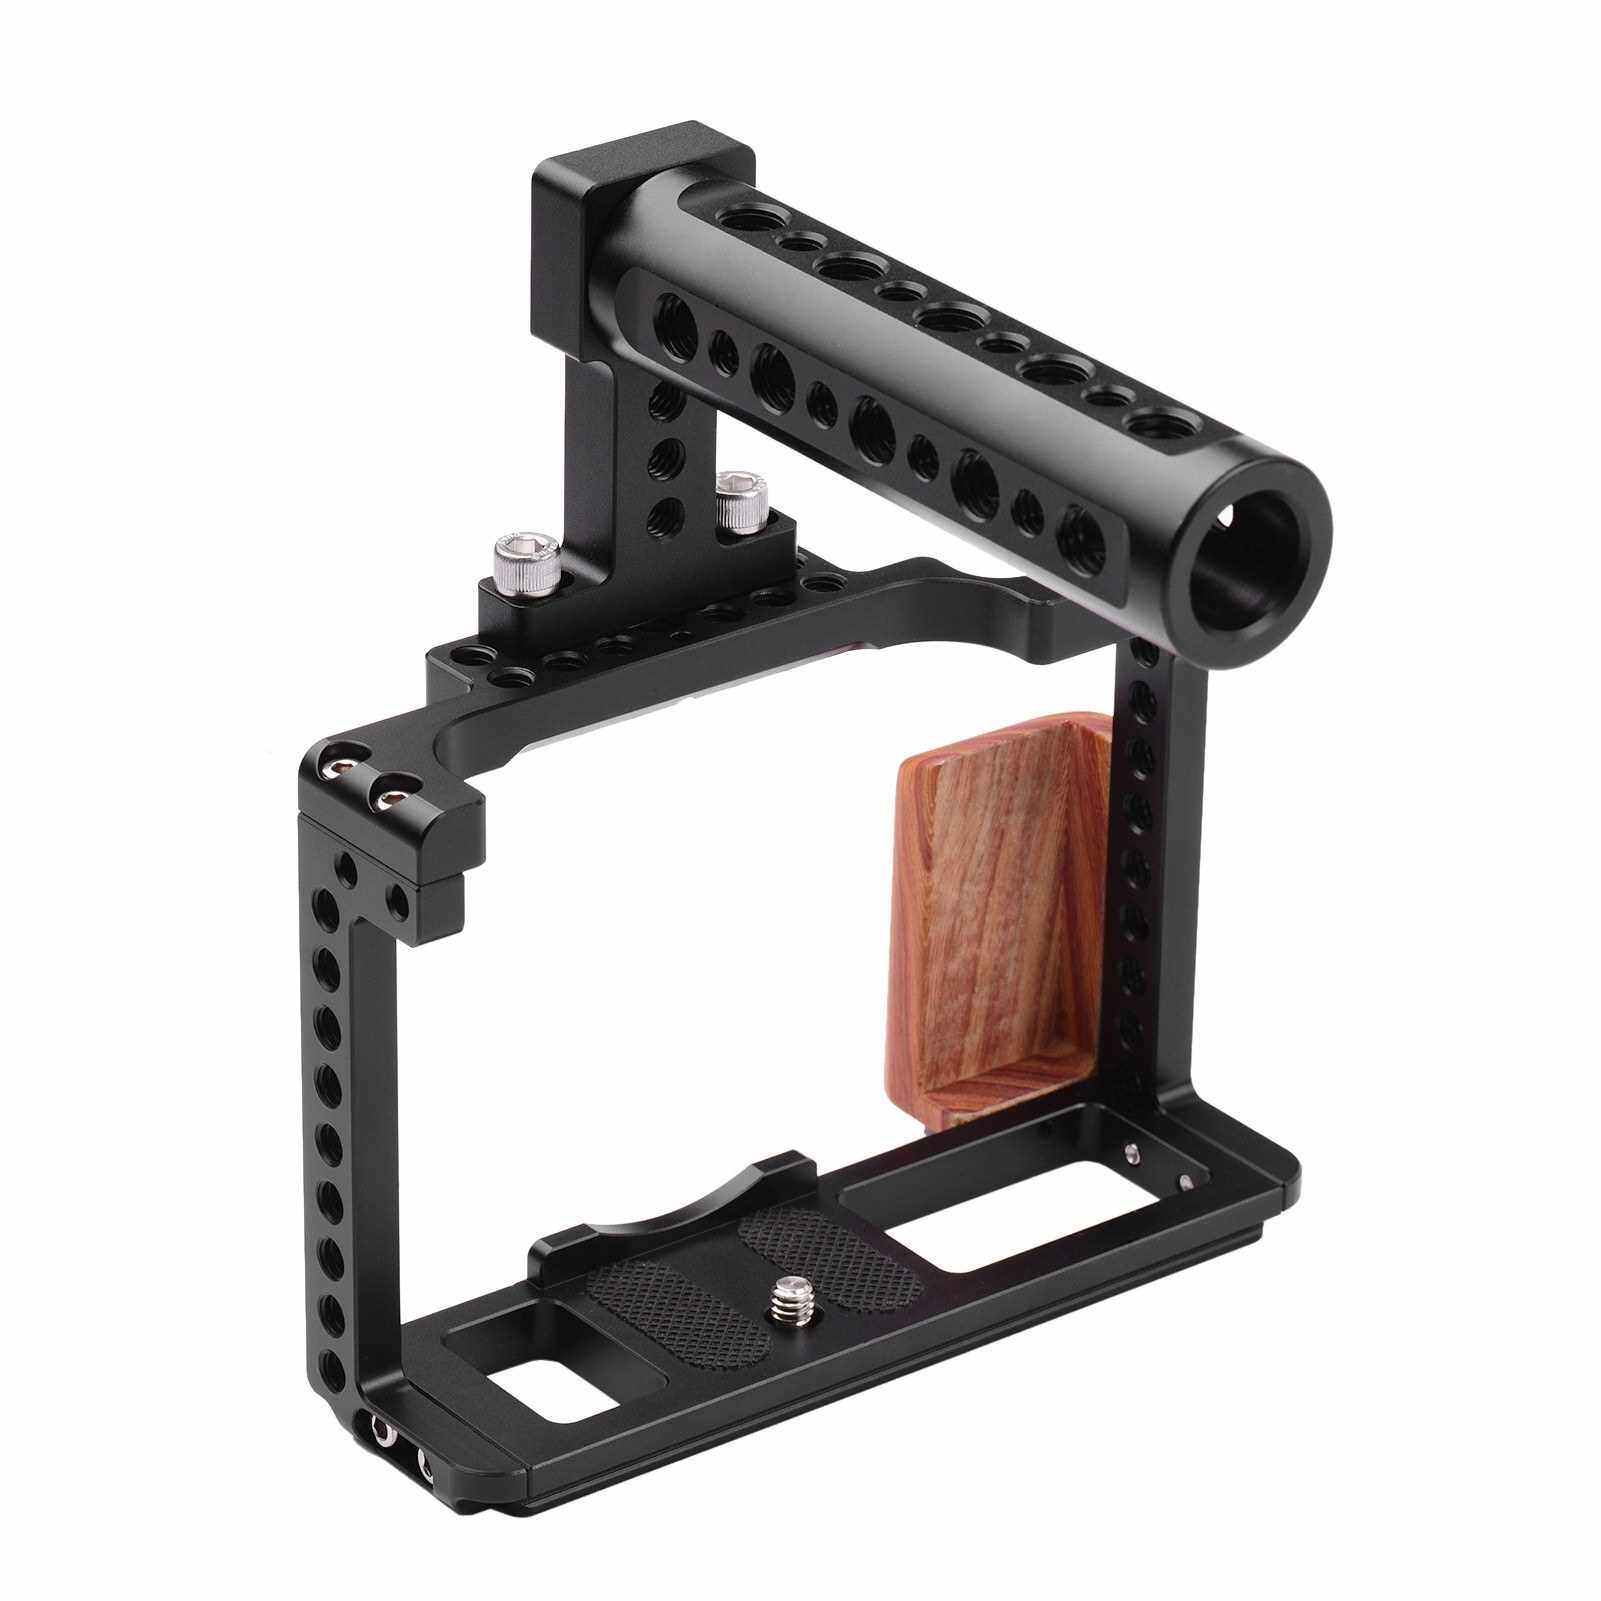 Andoer Aluminum Alloy Camera Cage Kit Protective Vlog Cage with Wooden Hand Grip Metal Top Handle Film Making System with Cold Shoe for Microphone Fill Light Compatible with Fujifilm X-T4 ILDC Camera (Standard)